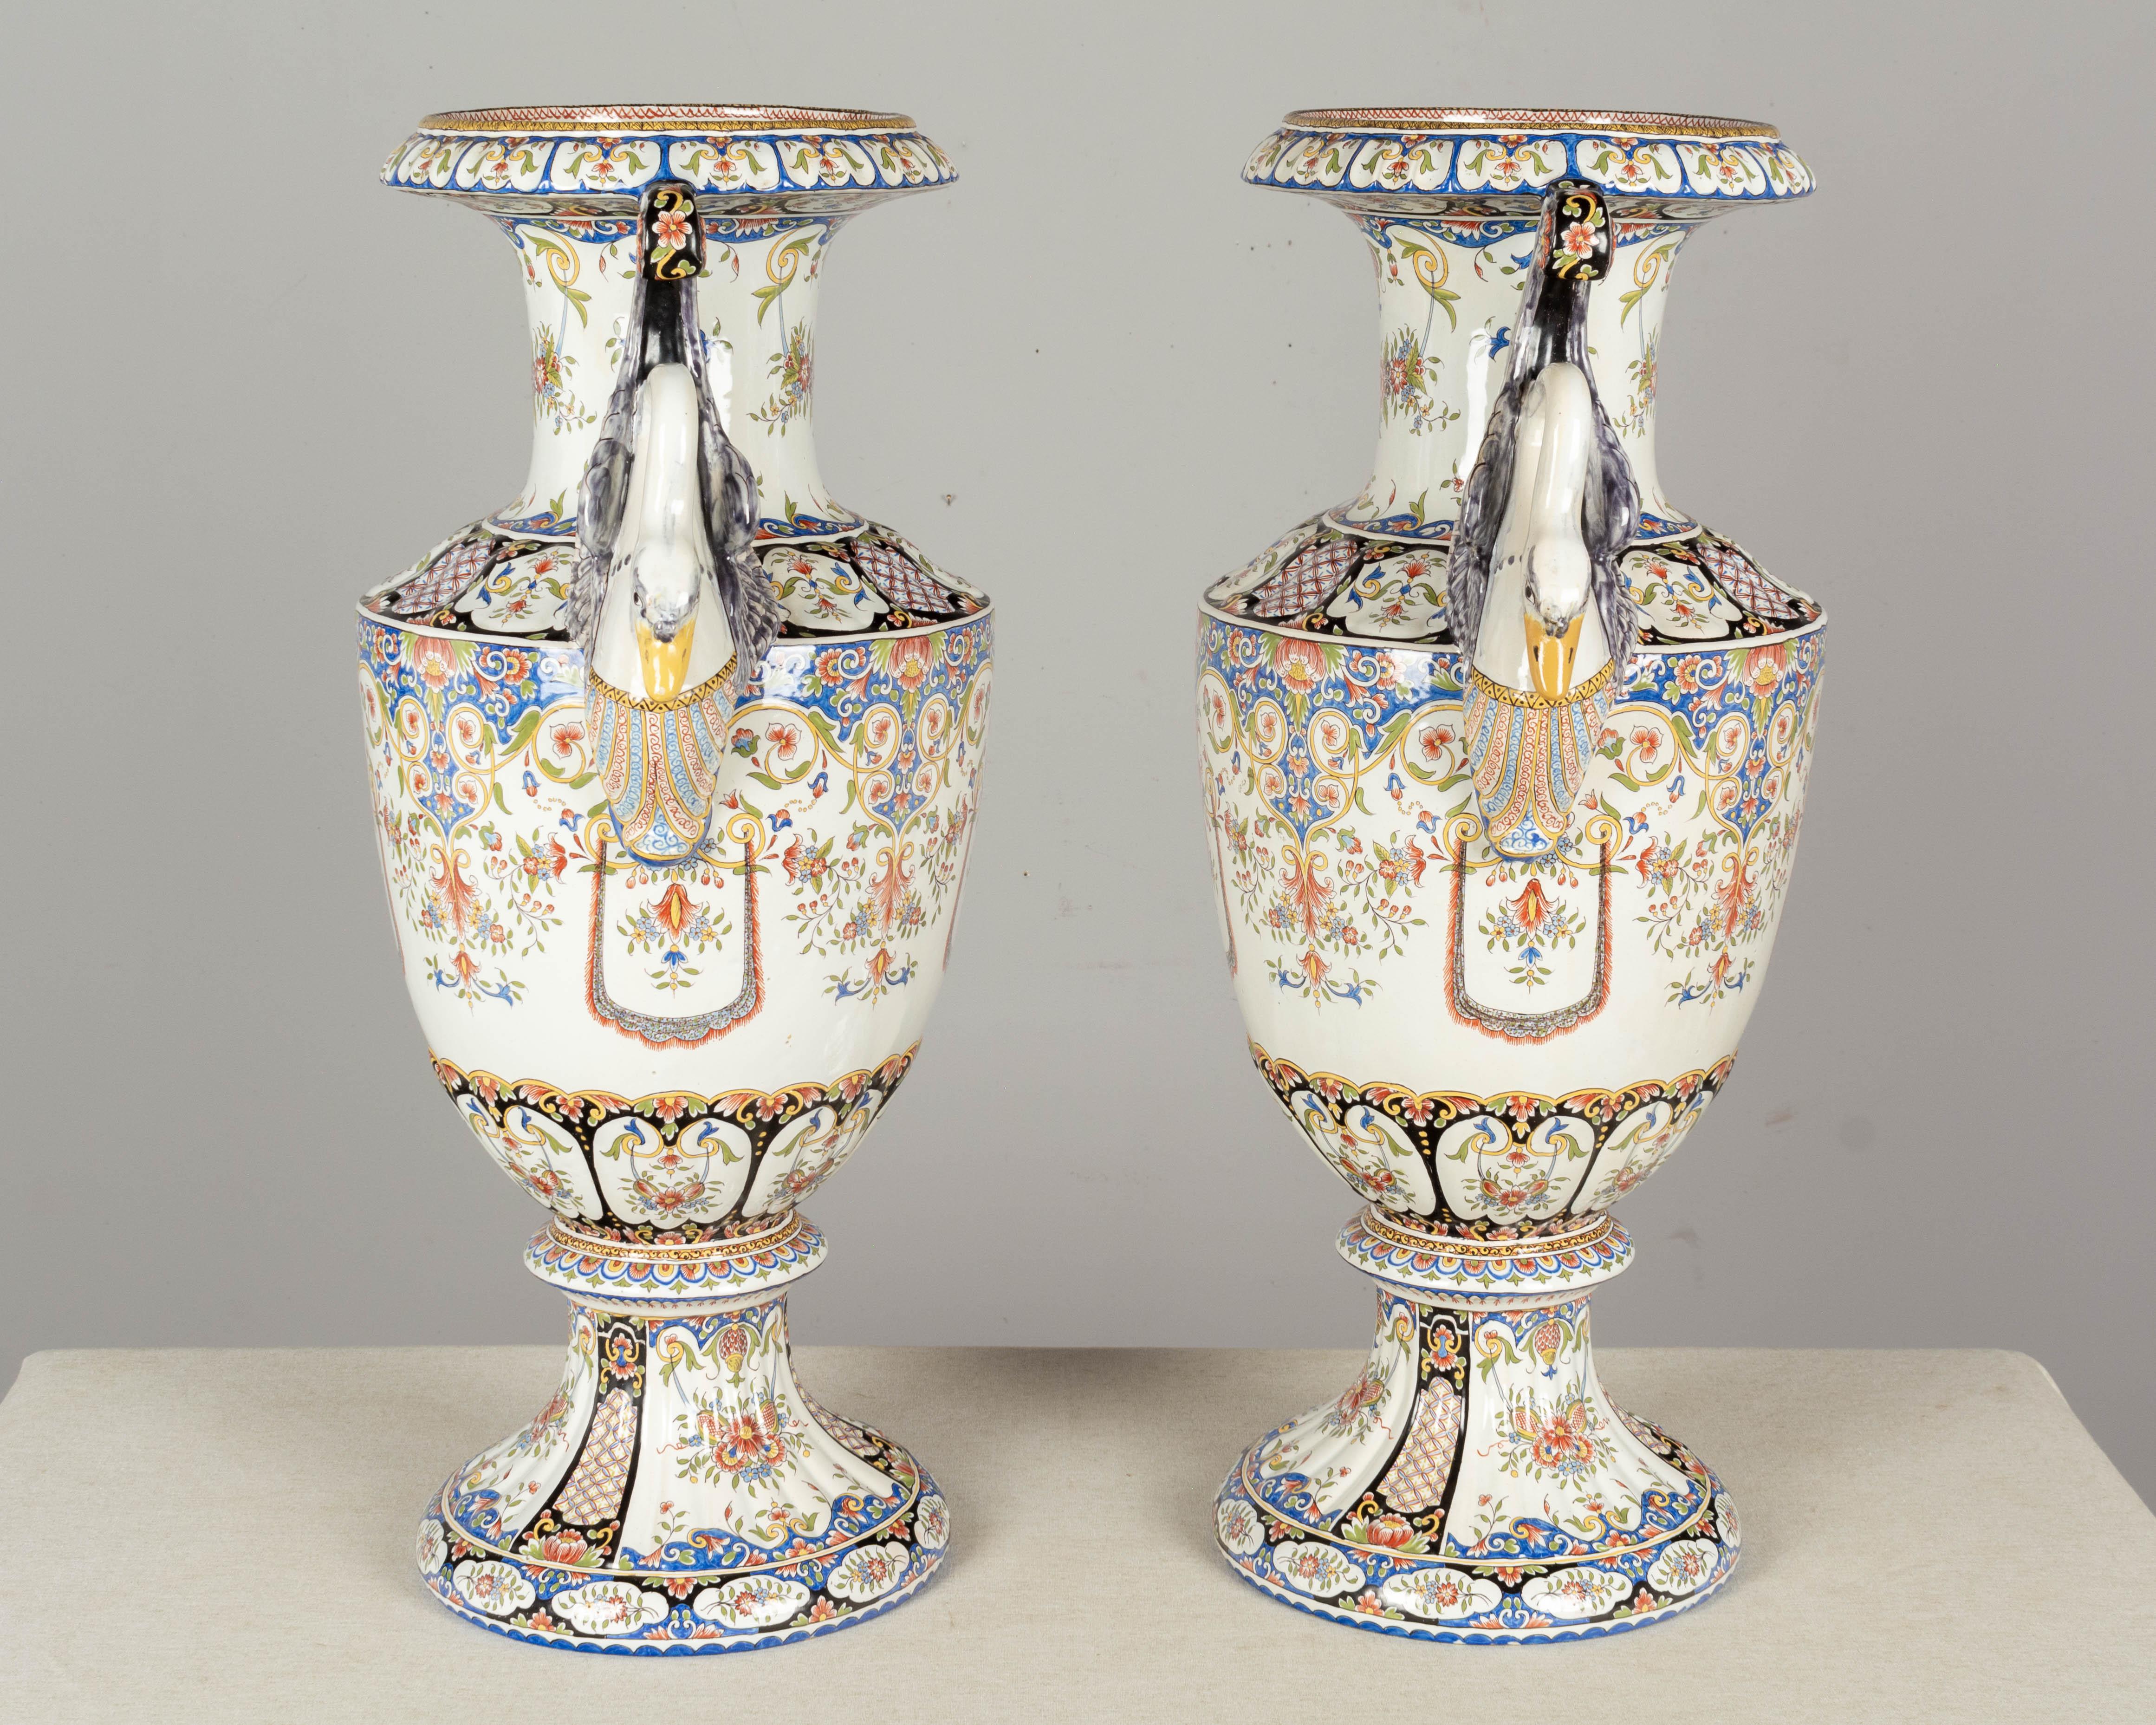 19th Century French Desvres Faience Urns, a Pair For Sale 2